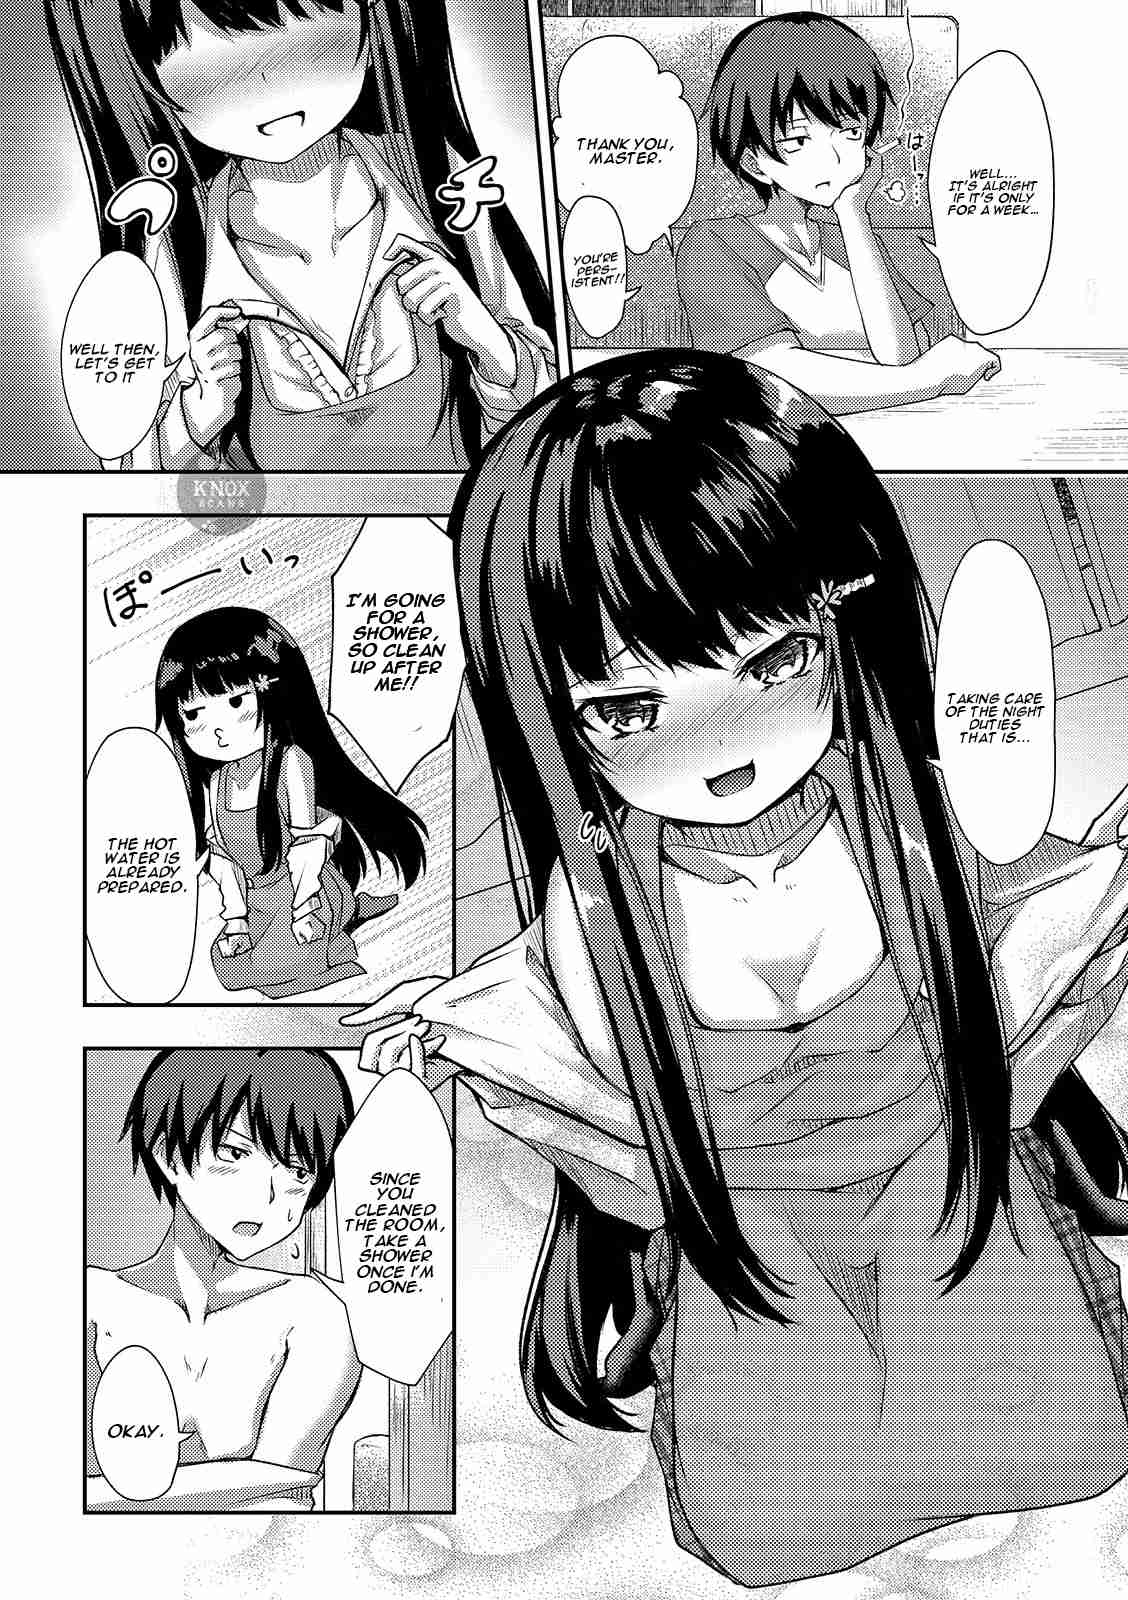 7 days with the troublesome future bride who is too kuudere Ch. 1